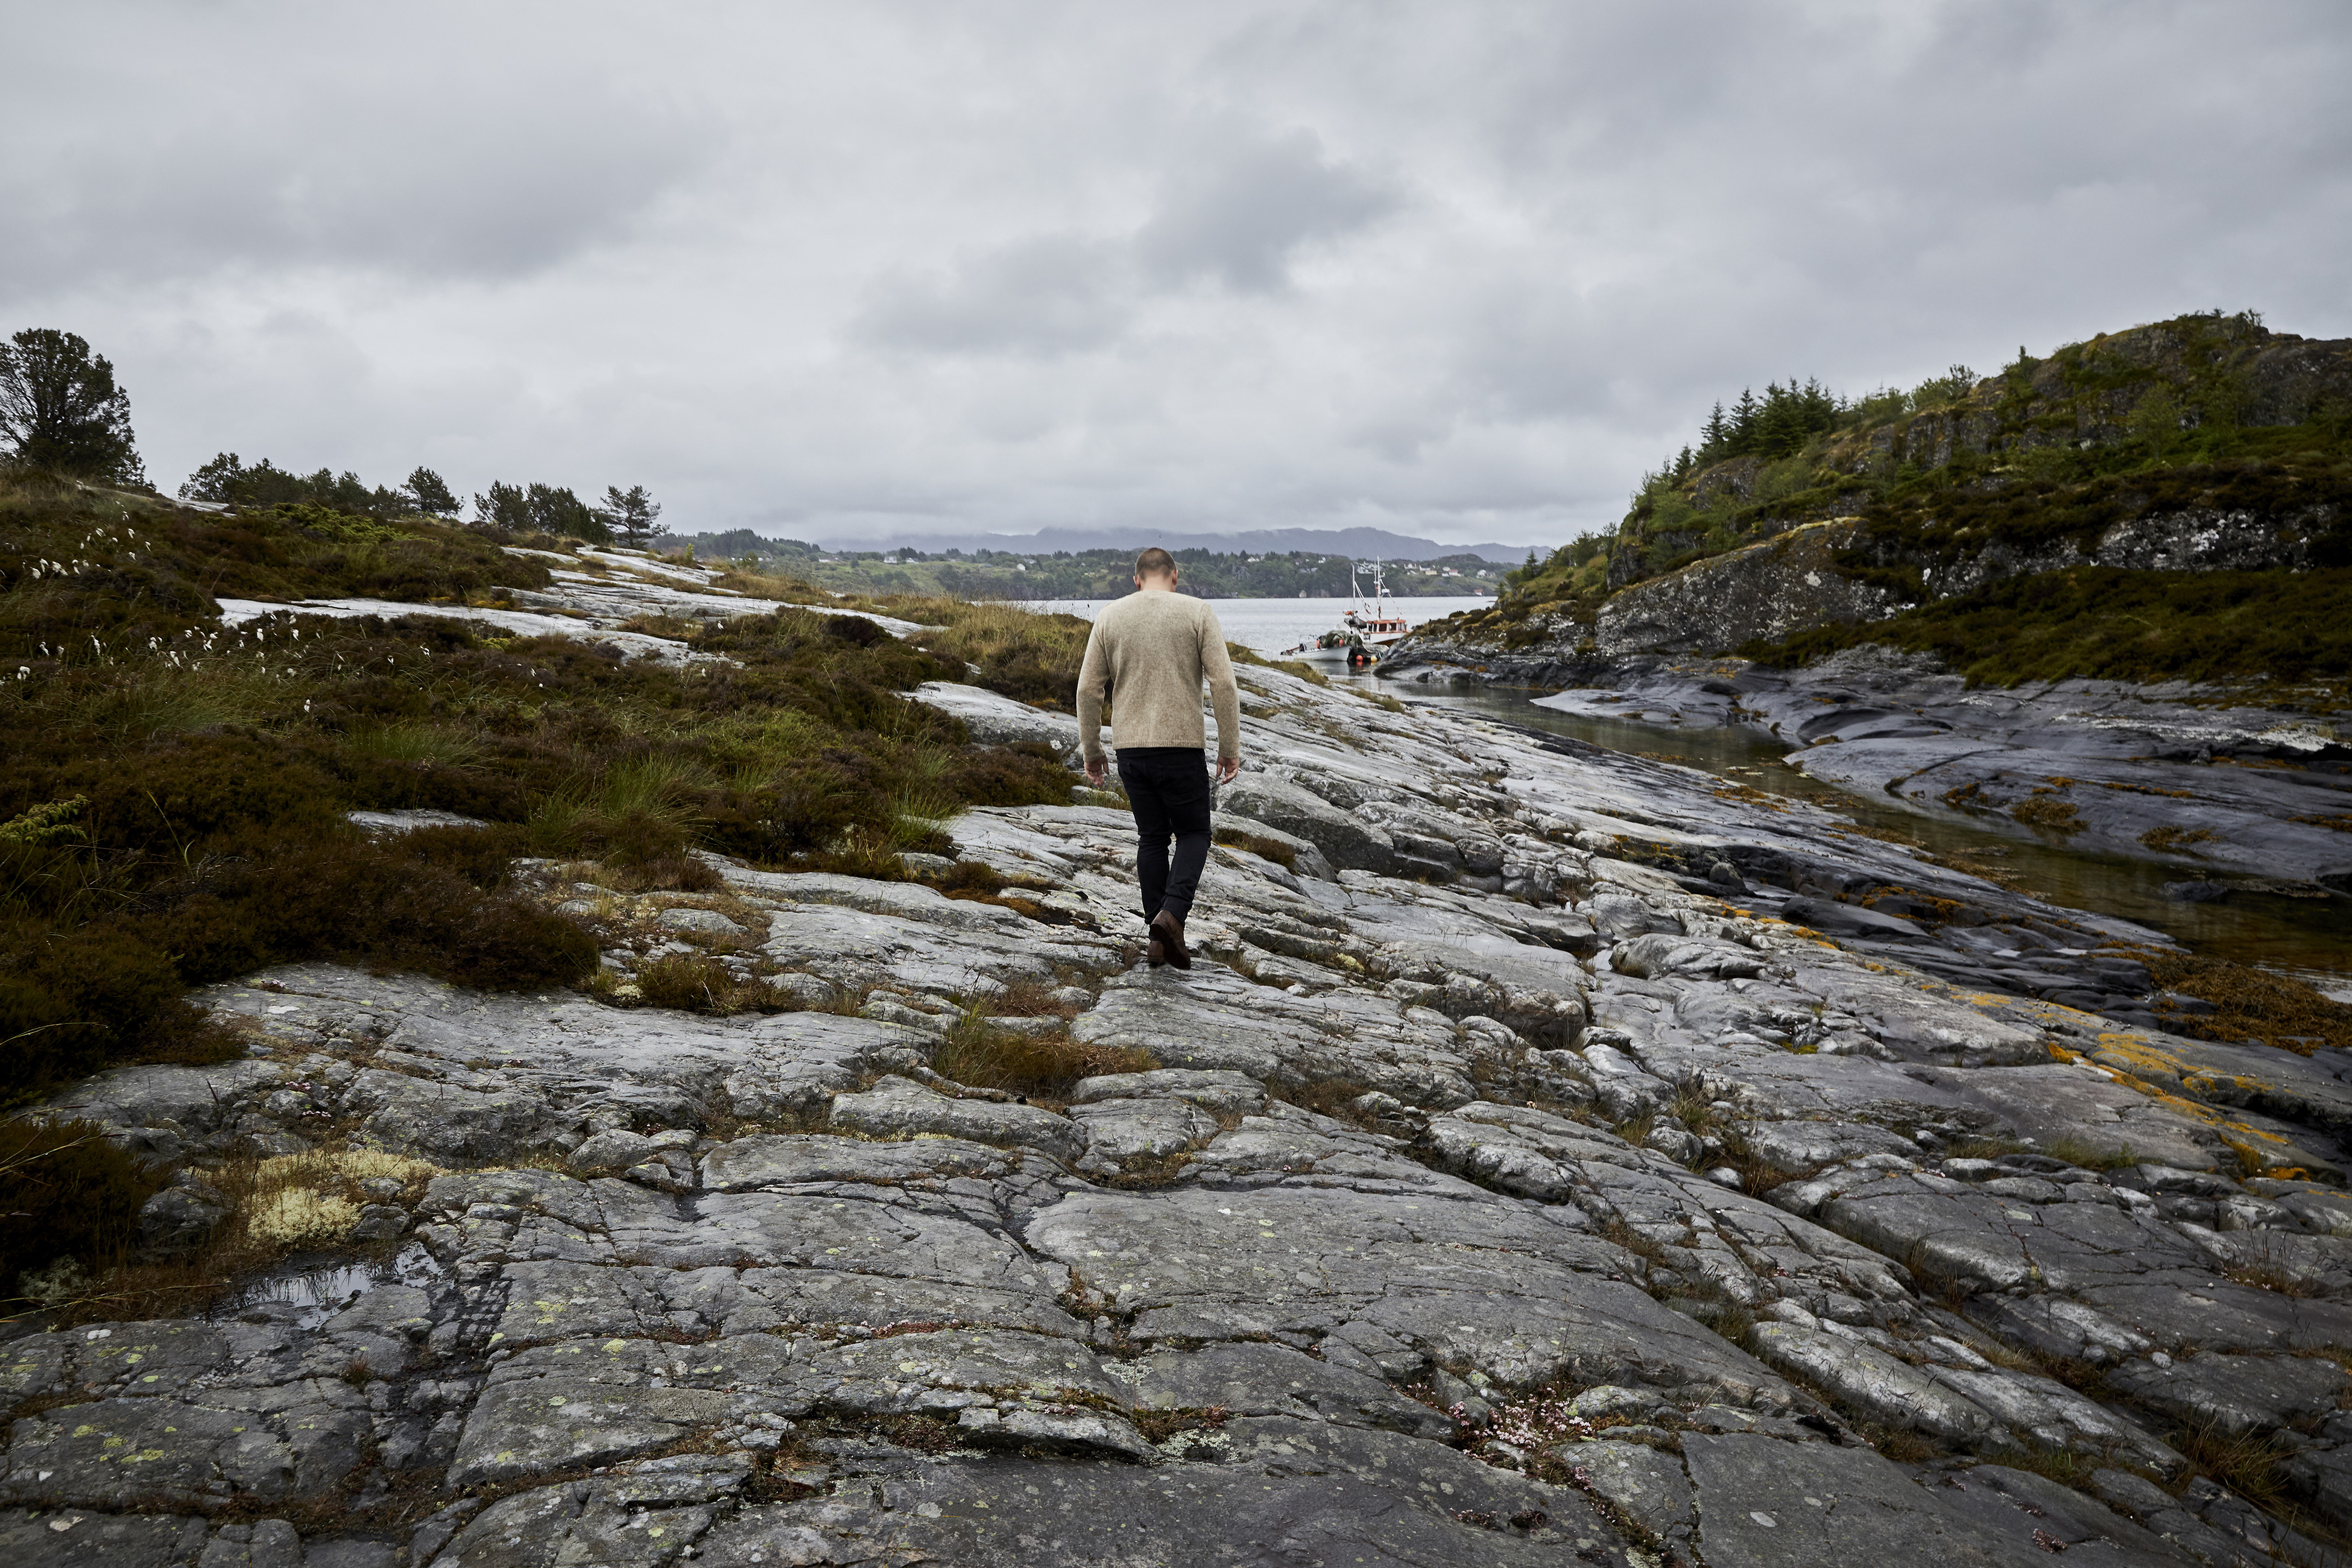 Lyseverket owner and chef Christopher Haatuft, walks across a rocky ...